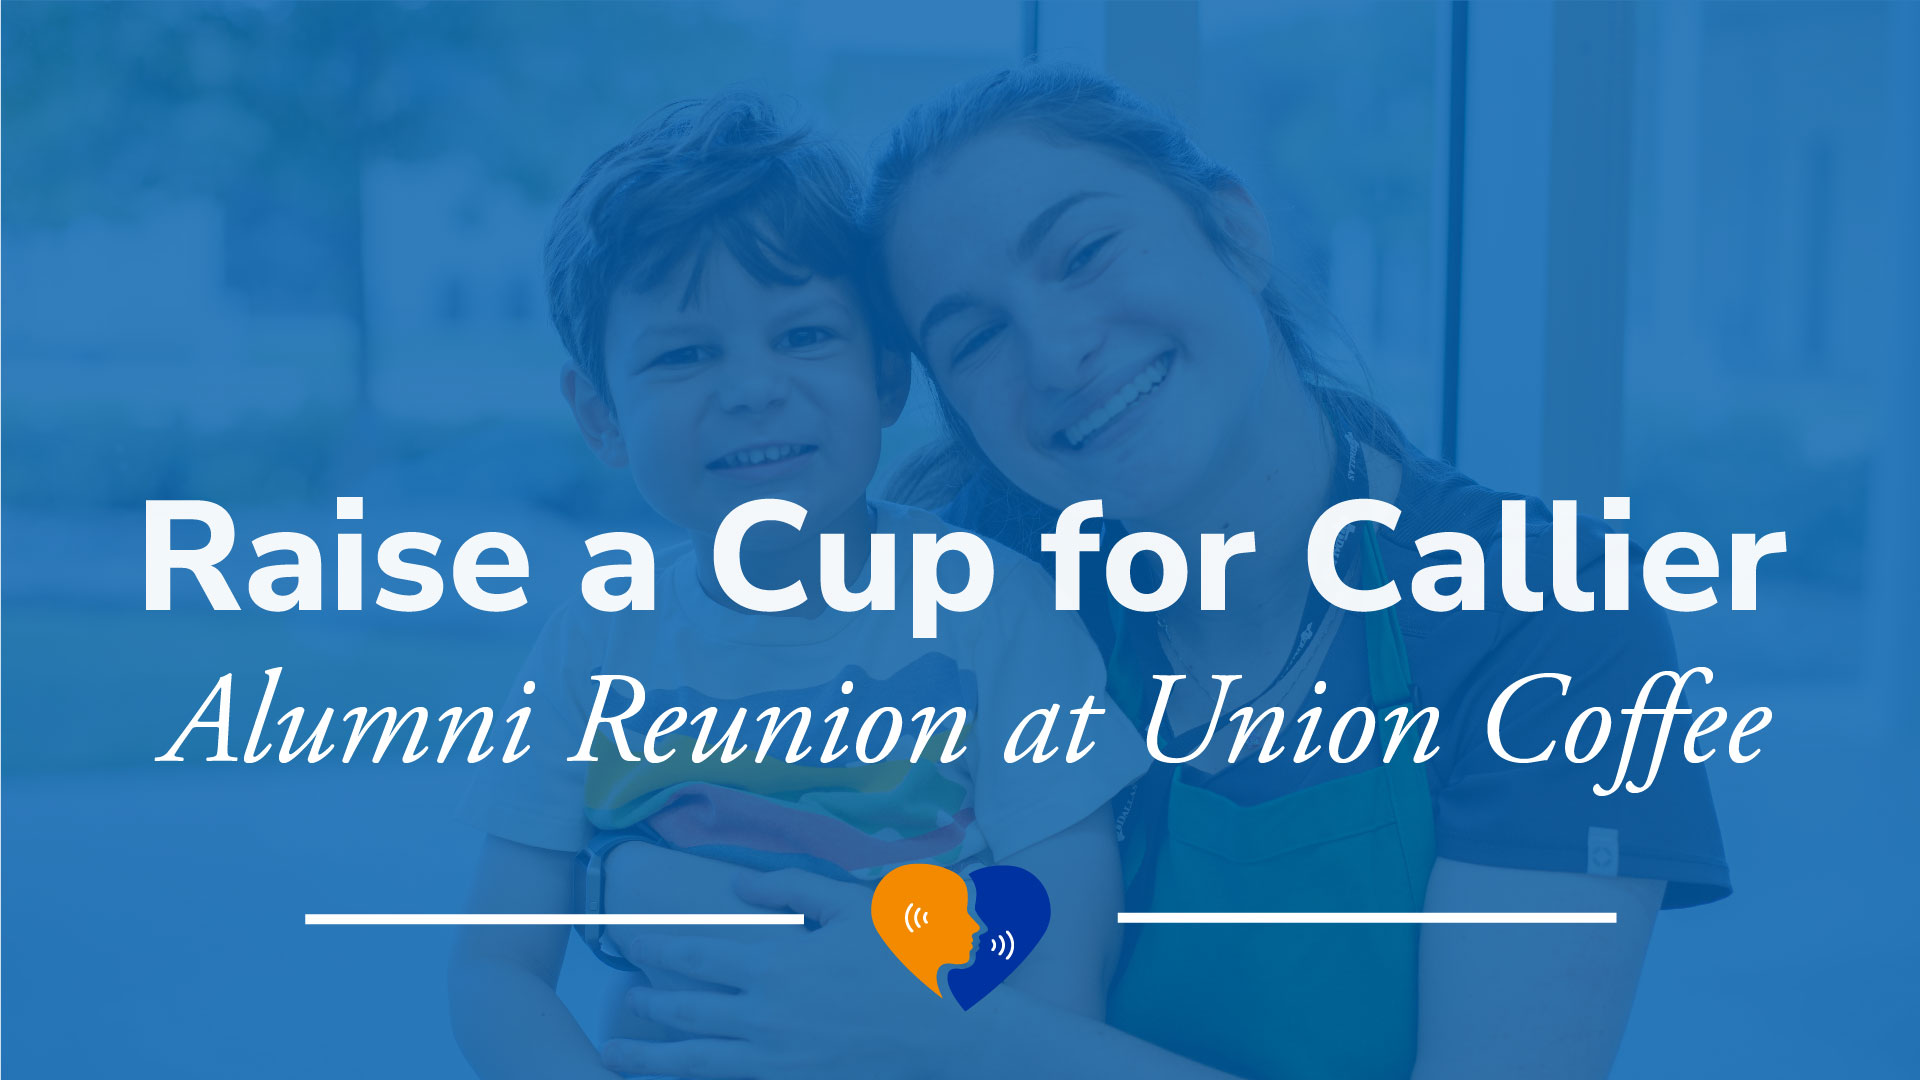 Raise a Cup for Calier. Woman and child posing for a photo. 